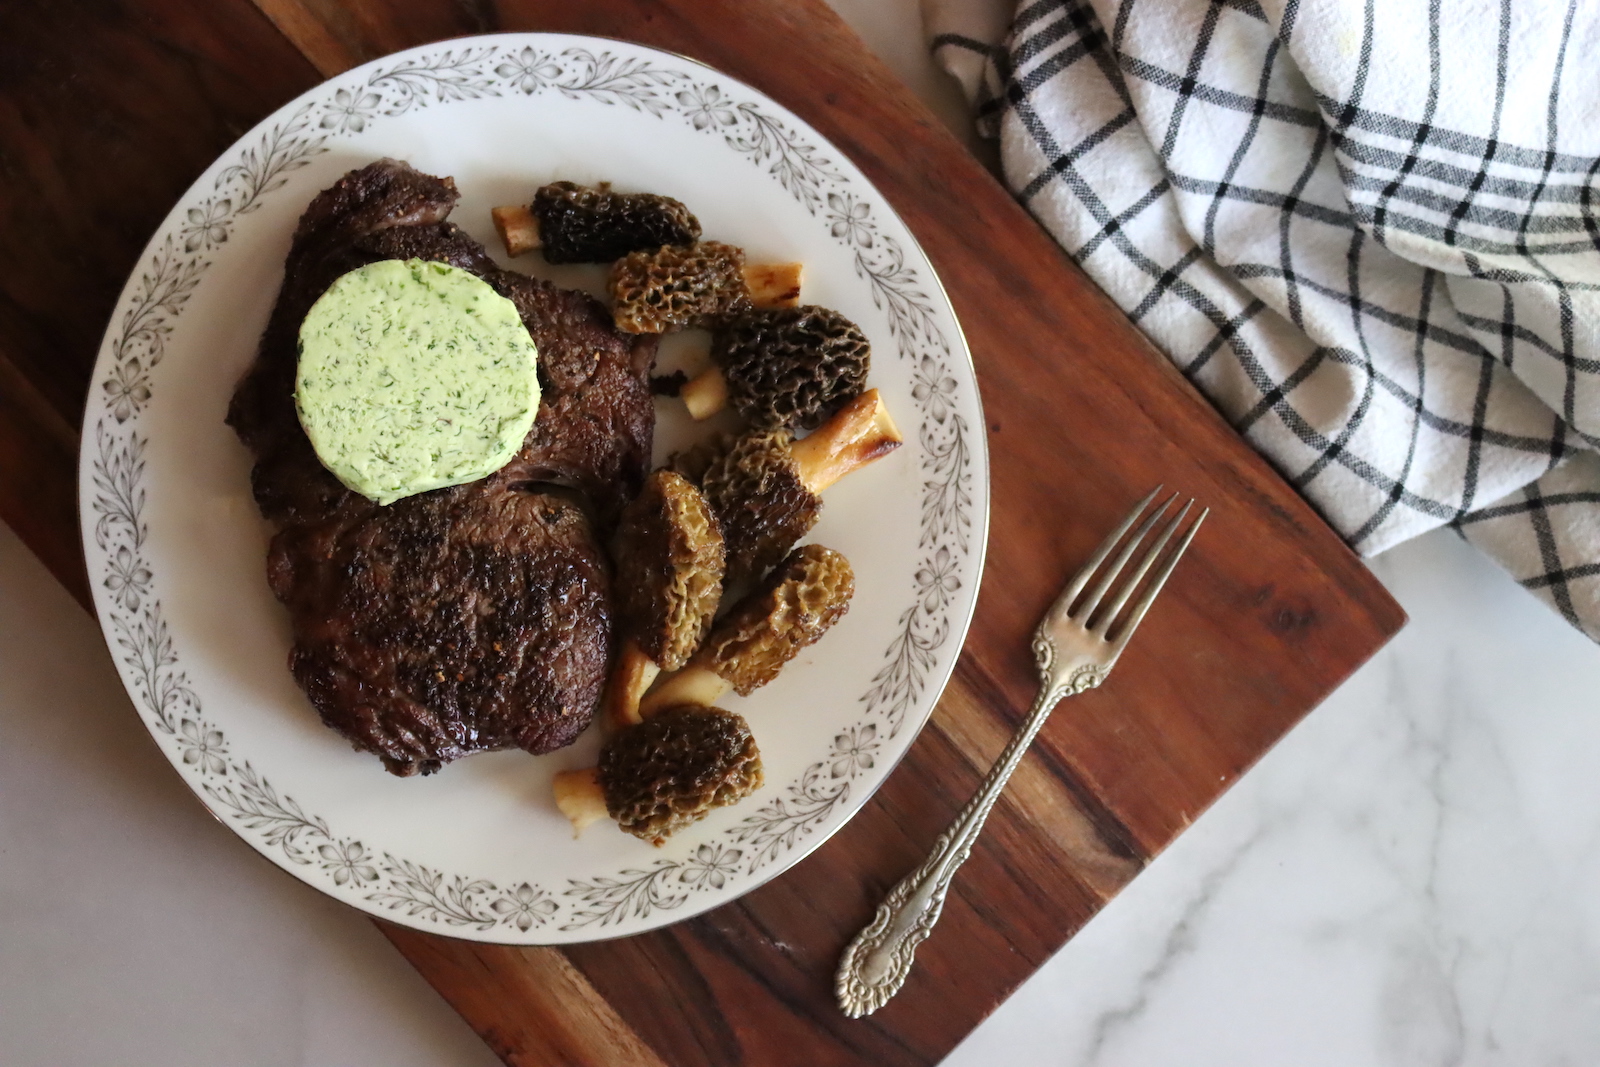 Ramp compound butter with steak and morels